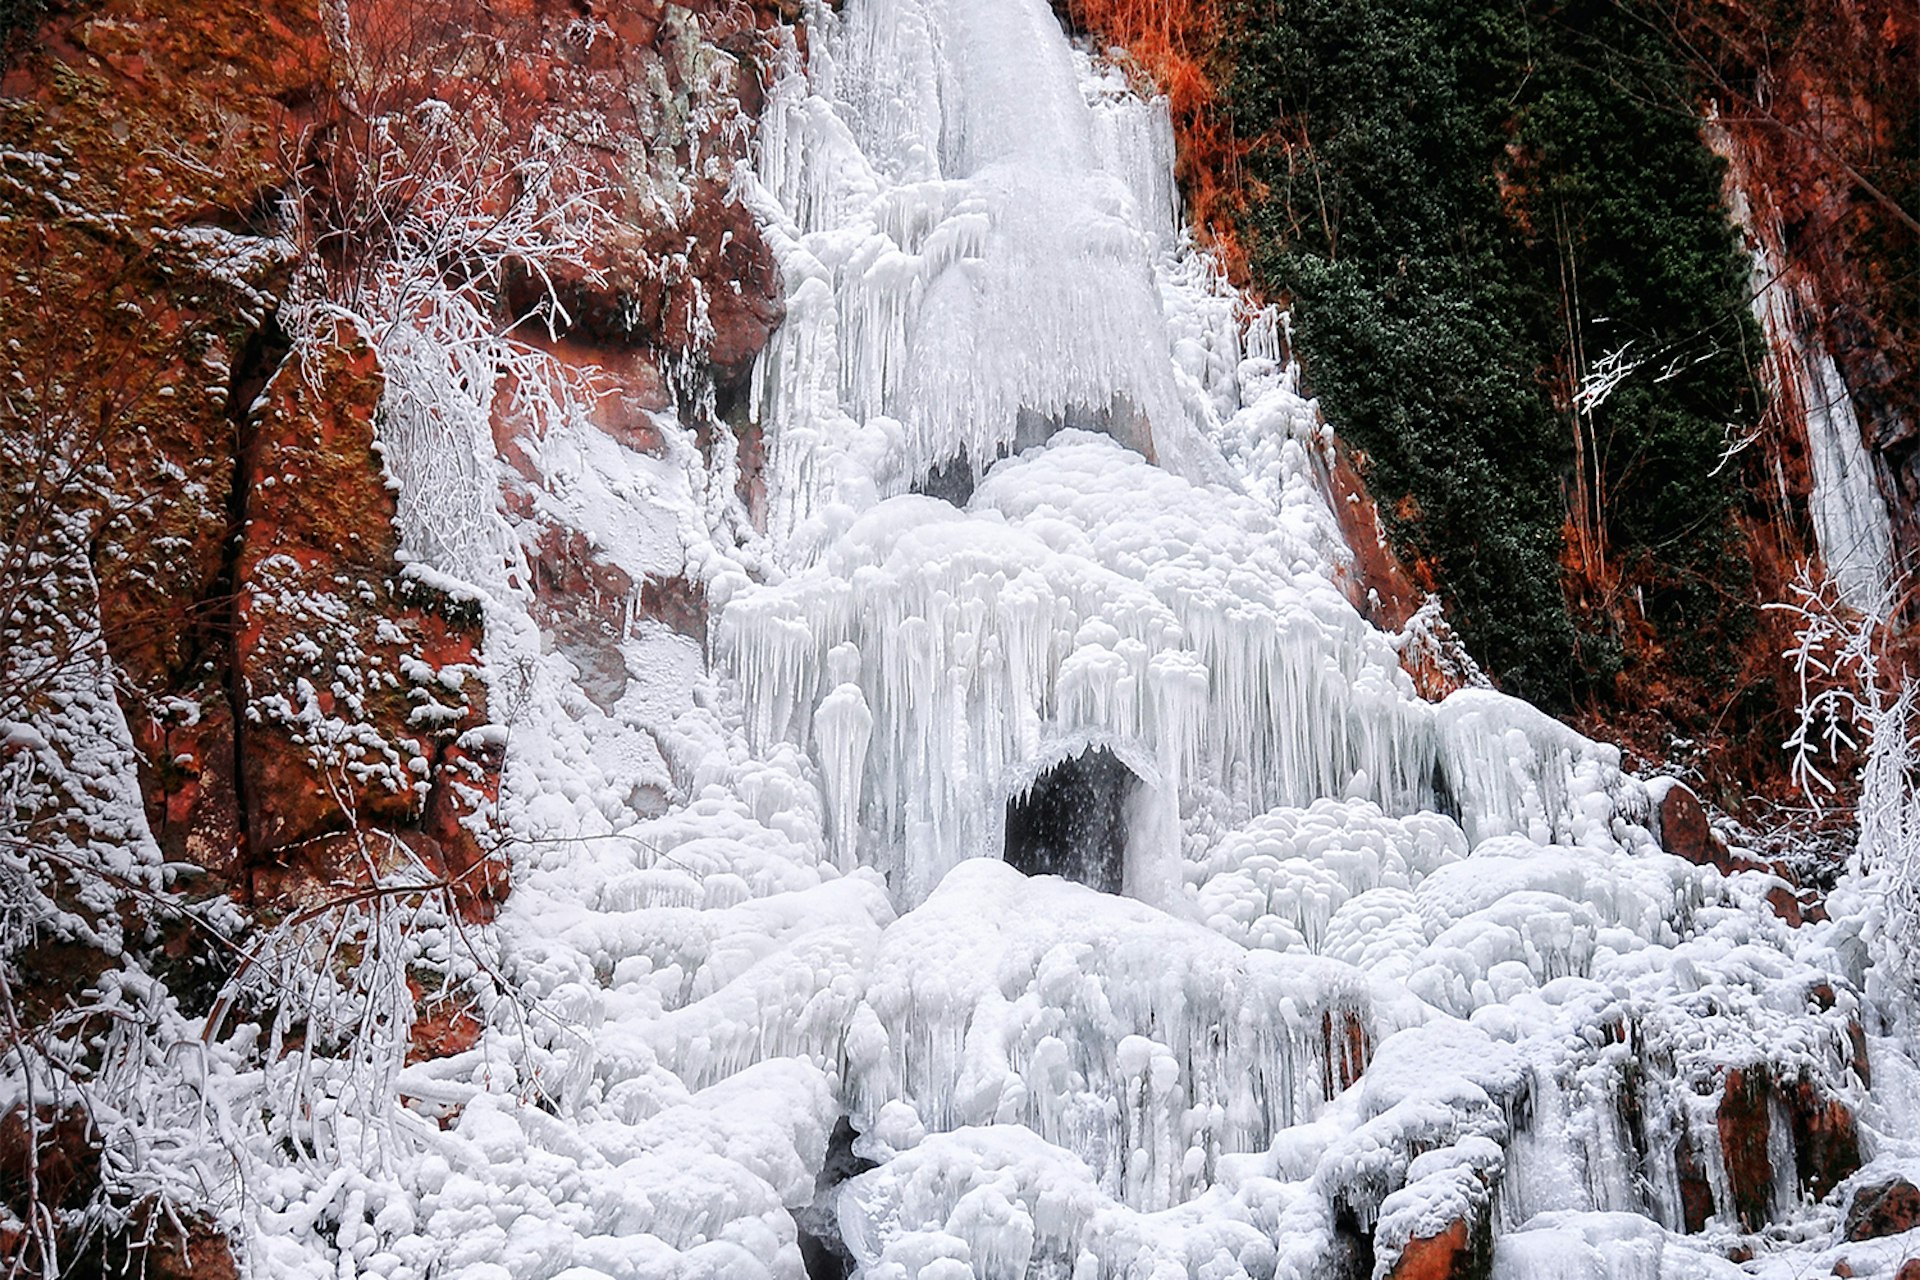 The frozen waterfall of Nideck, France © Philippe Sainte-Laudy Photography / Getty Images